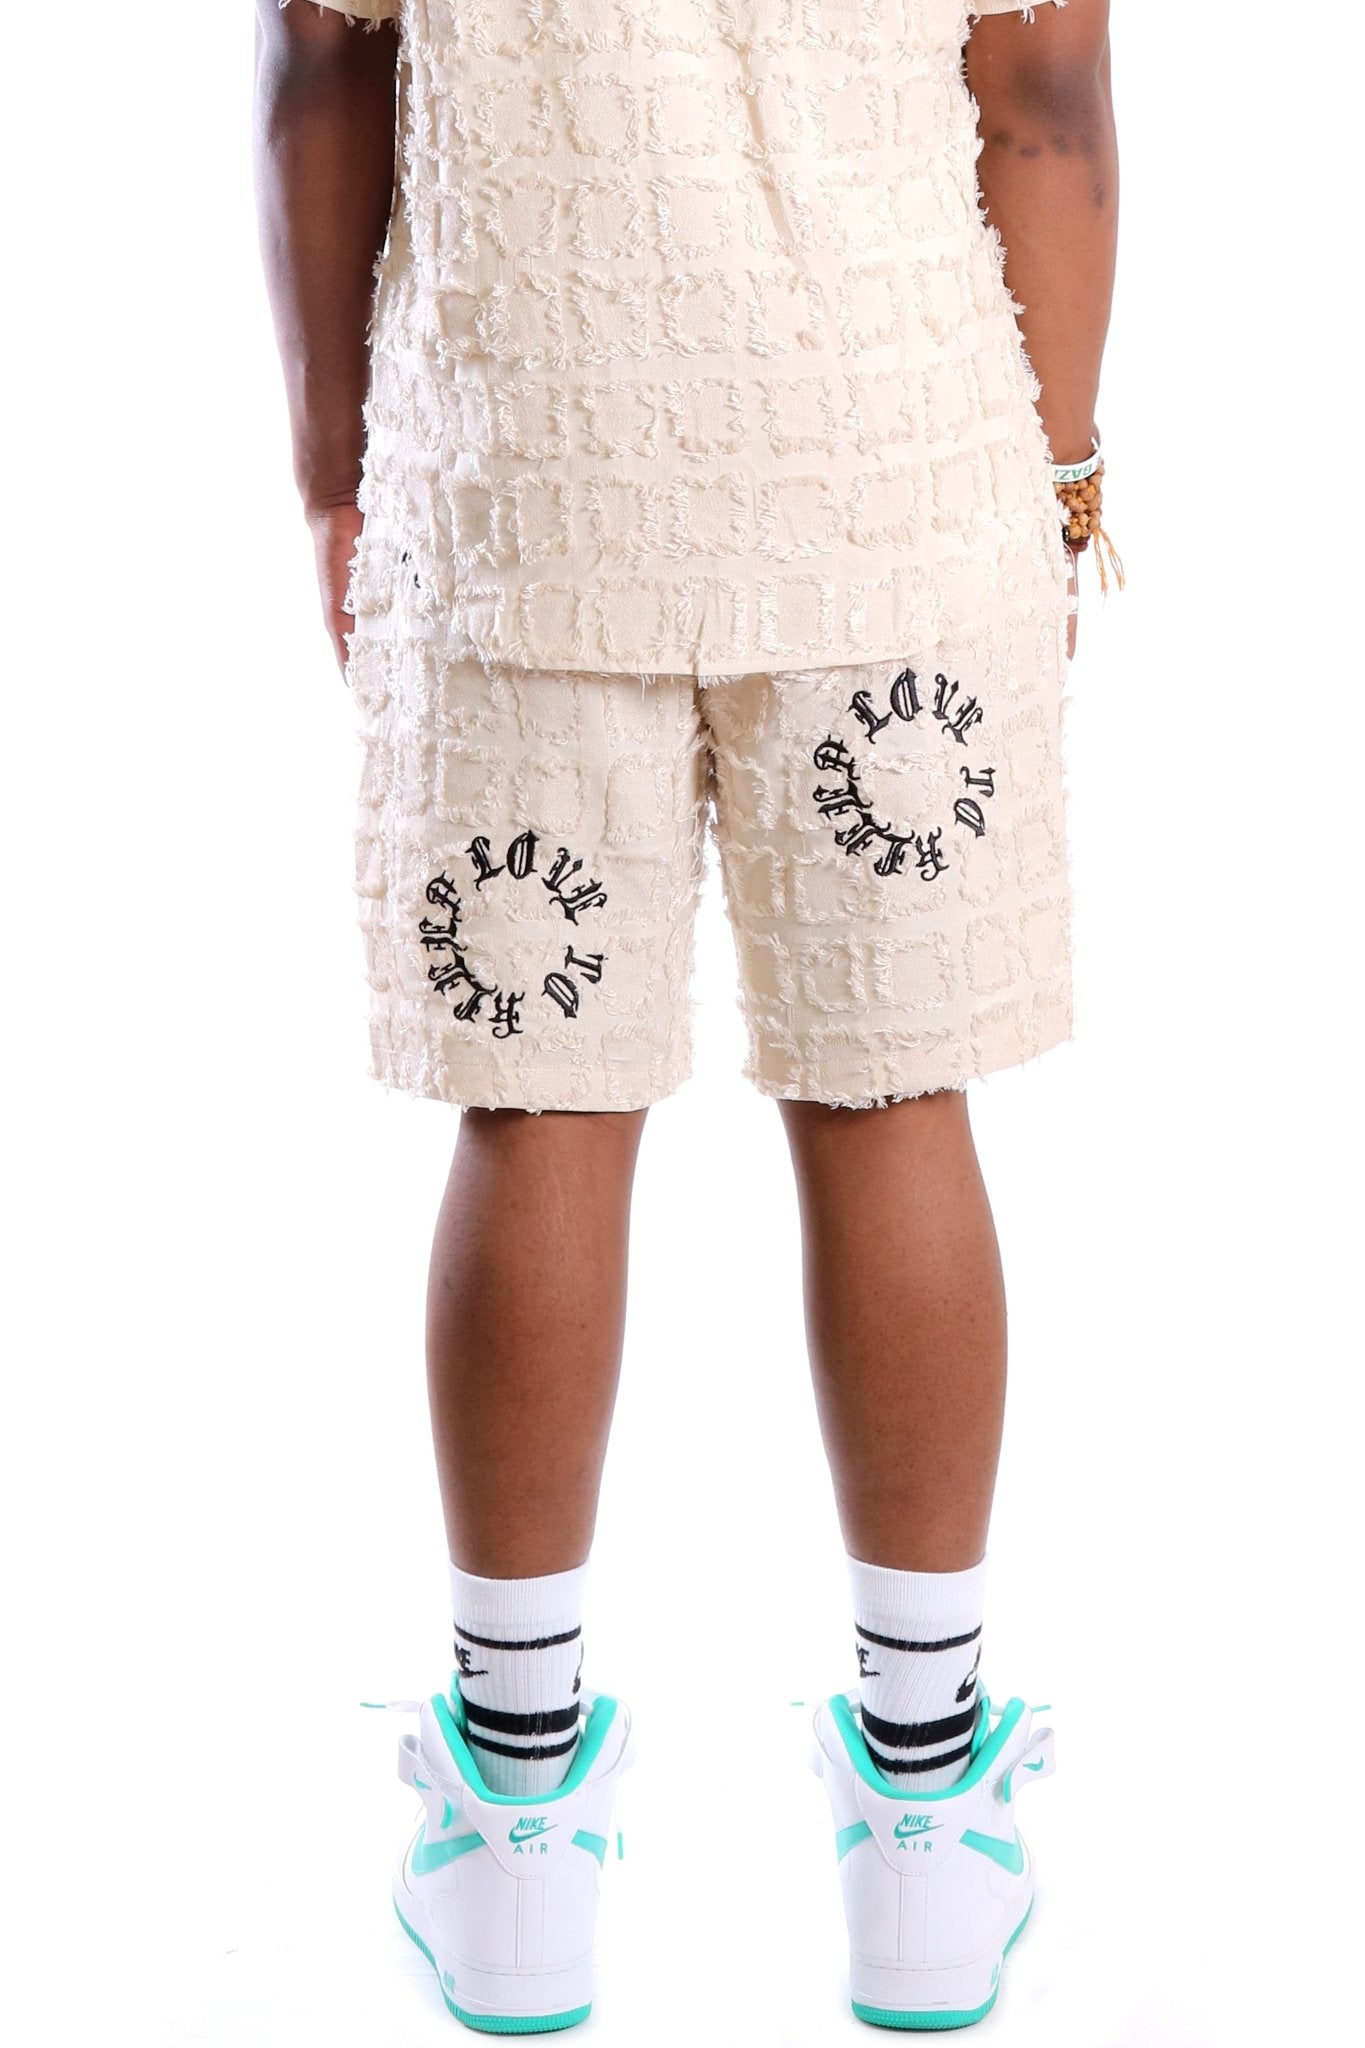 Earth Men's ripped & repaired short pants - Love to KleepMen's Short PantsKLEEPLove to Kleep